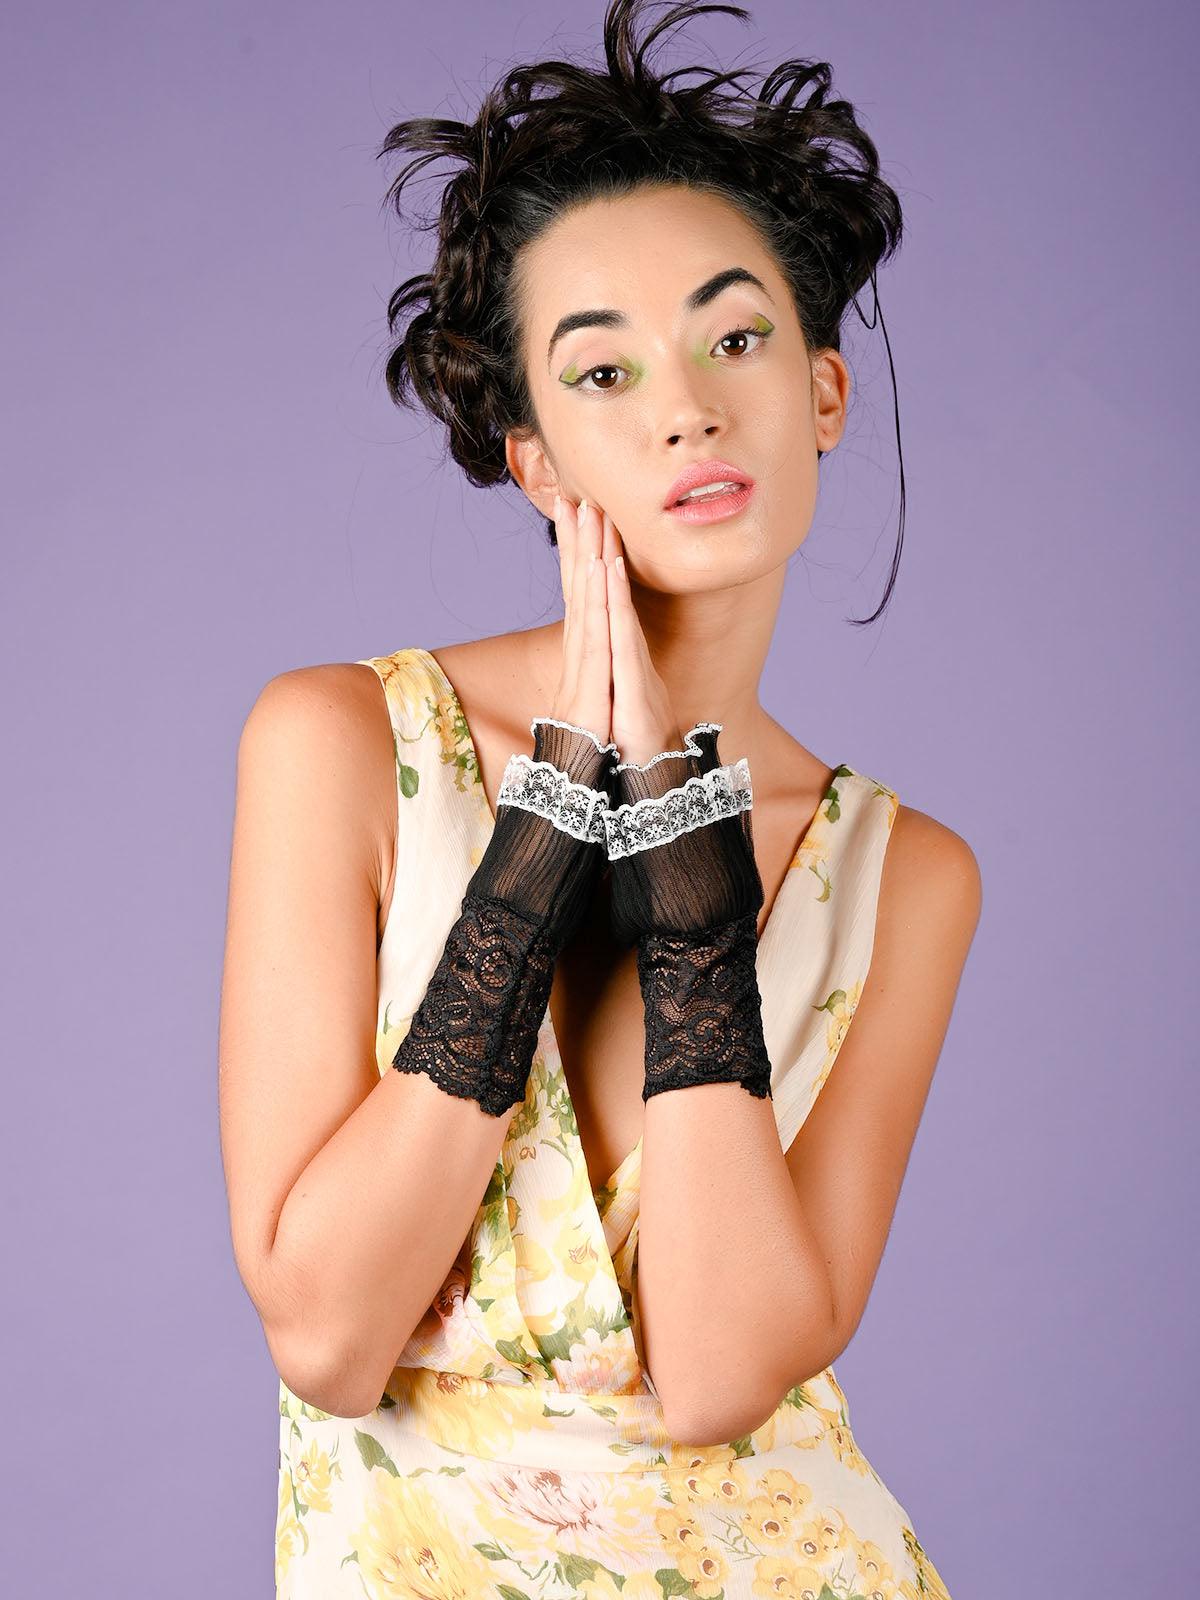 

Gorgeous black lace frills hand gloves